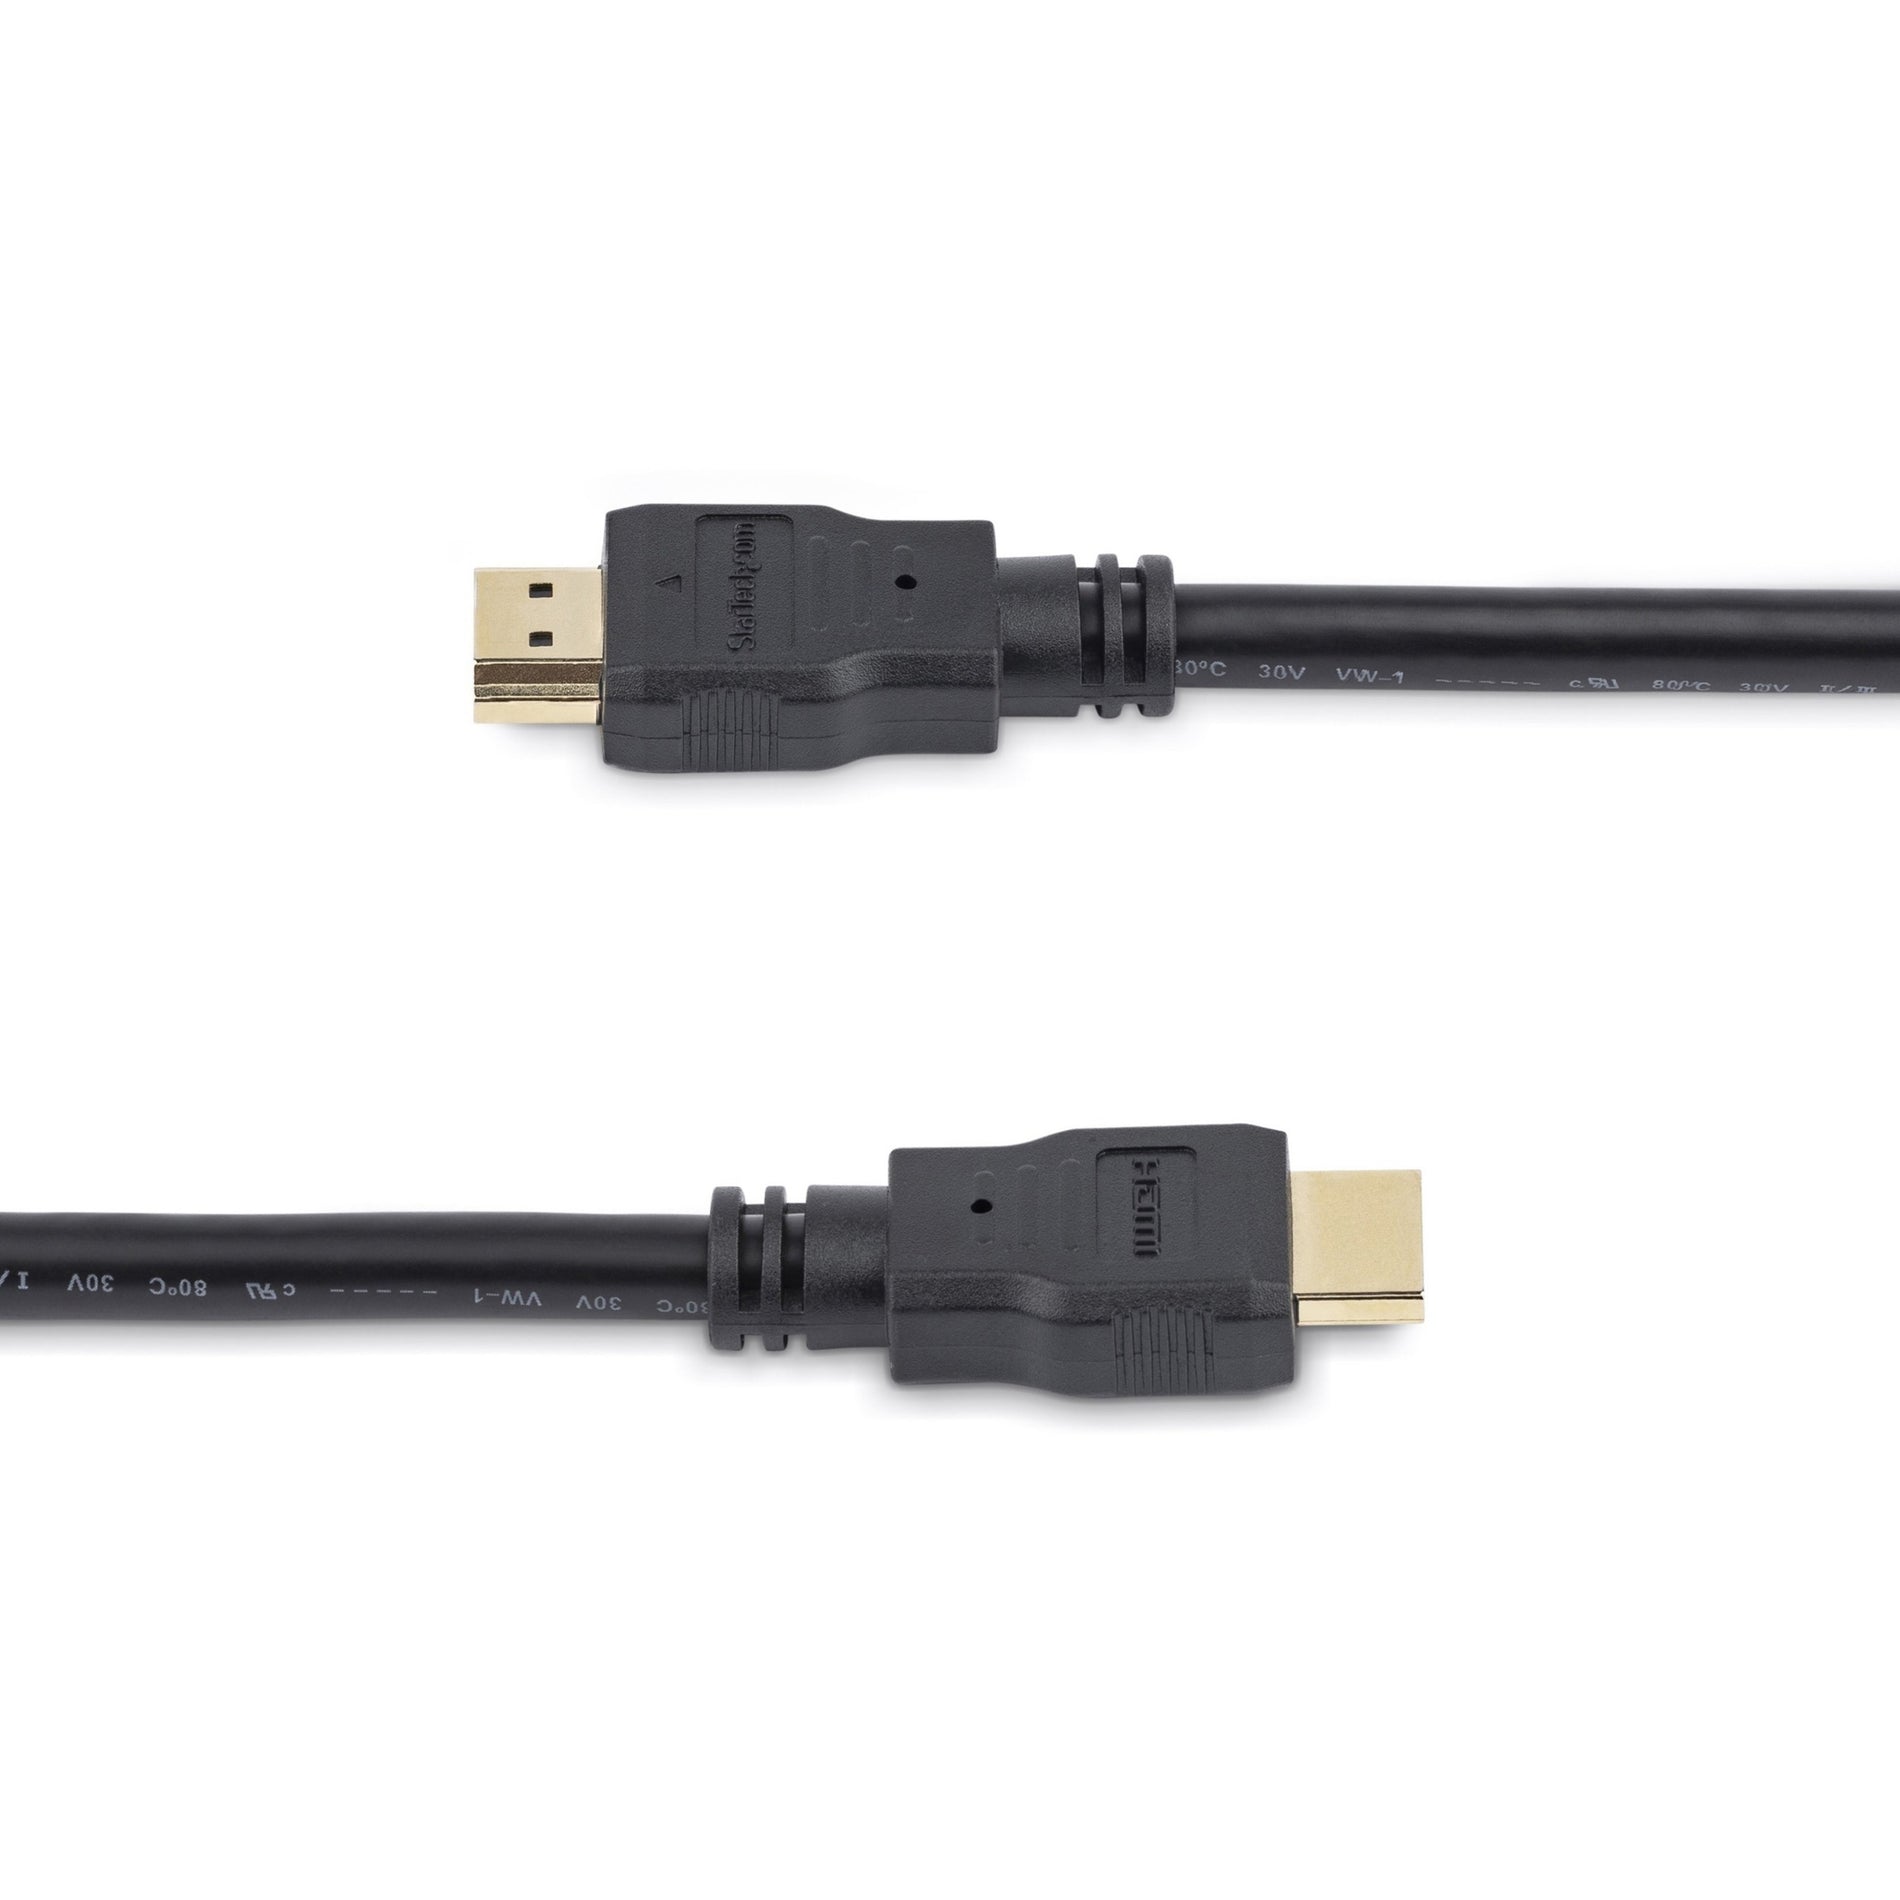 StarTech.com HDMM30CM 0.3m (1ft) Short High Speed HDMI Cable, HDMI to HDMI, M/M - Ideal for Smartphones, Tablets, Cameras, and Notebooks